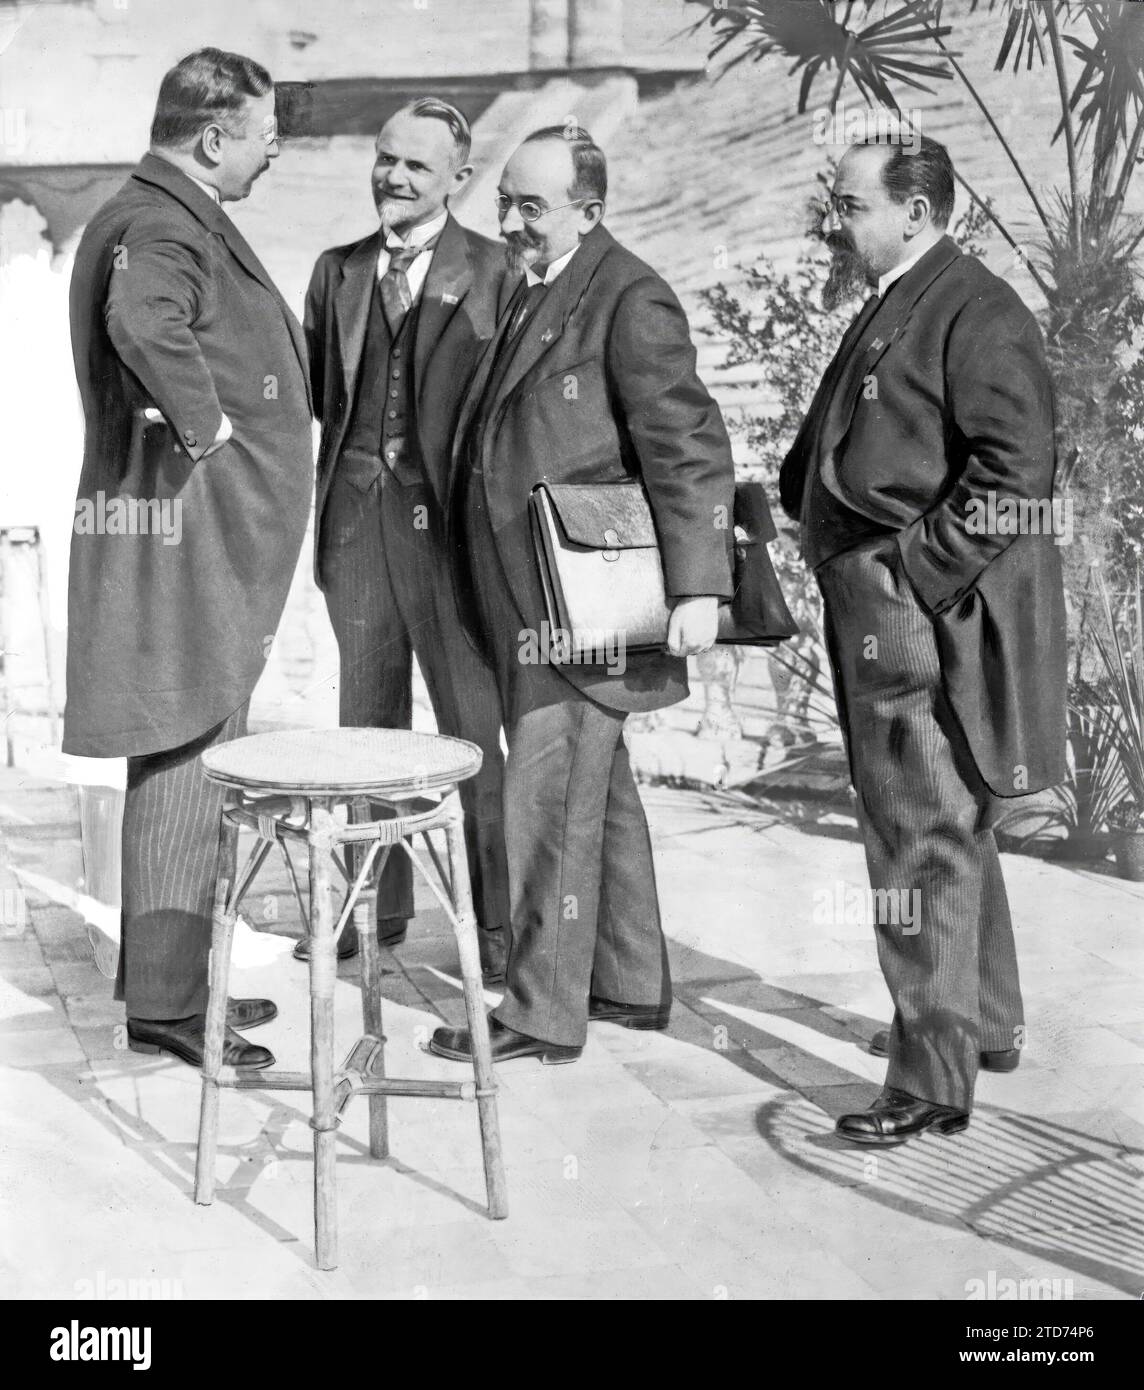 03/31/1922. Germans and Russians at the Genoa conference. German Chancellor Dr. Wirth (1) Talking with the Russians Chicherin (2), head of the Delegation; Krassin (3) and Joffre (4) on the terrace of the royal palace. Credit: Album / Archivo ABC Stock Photo